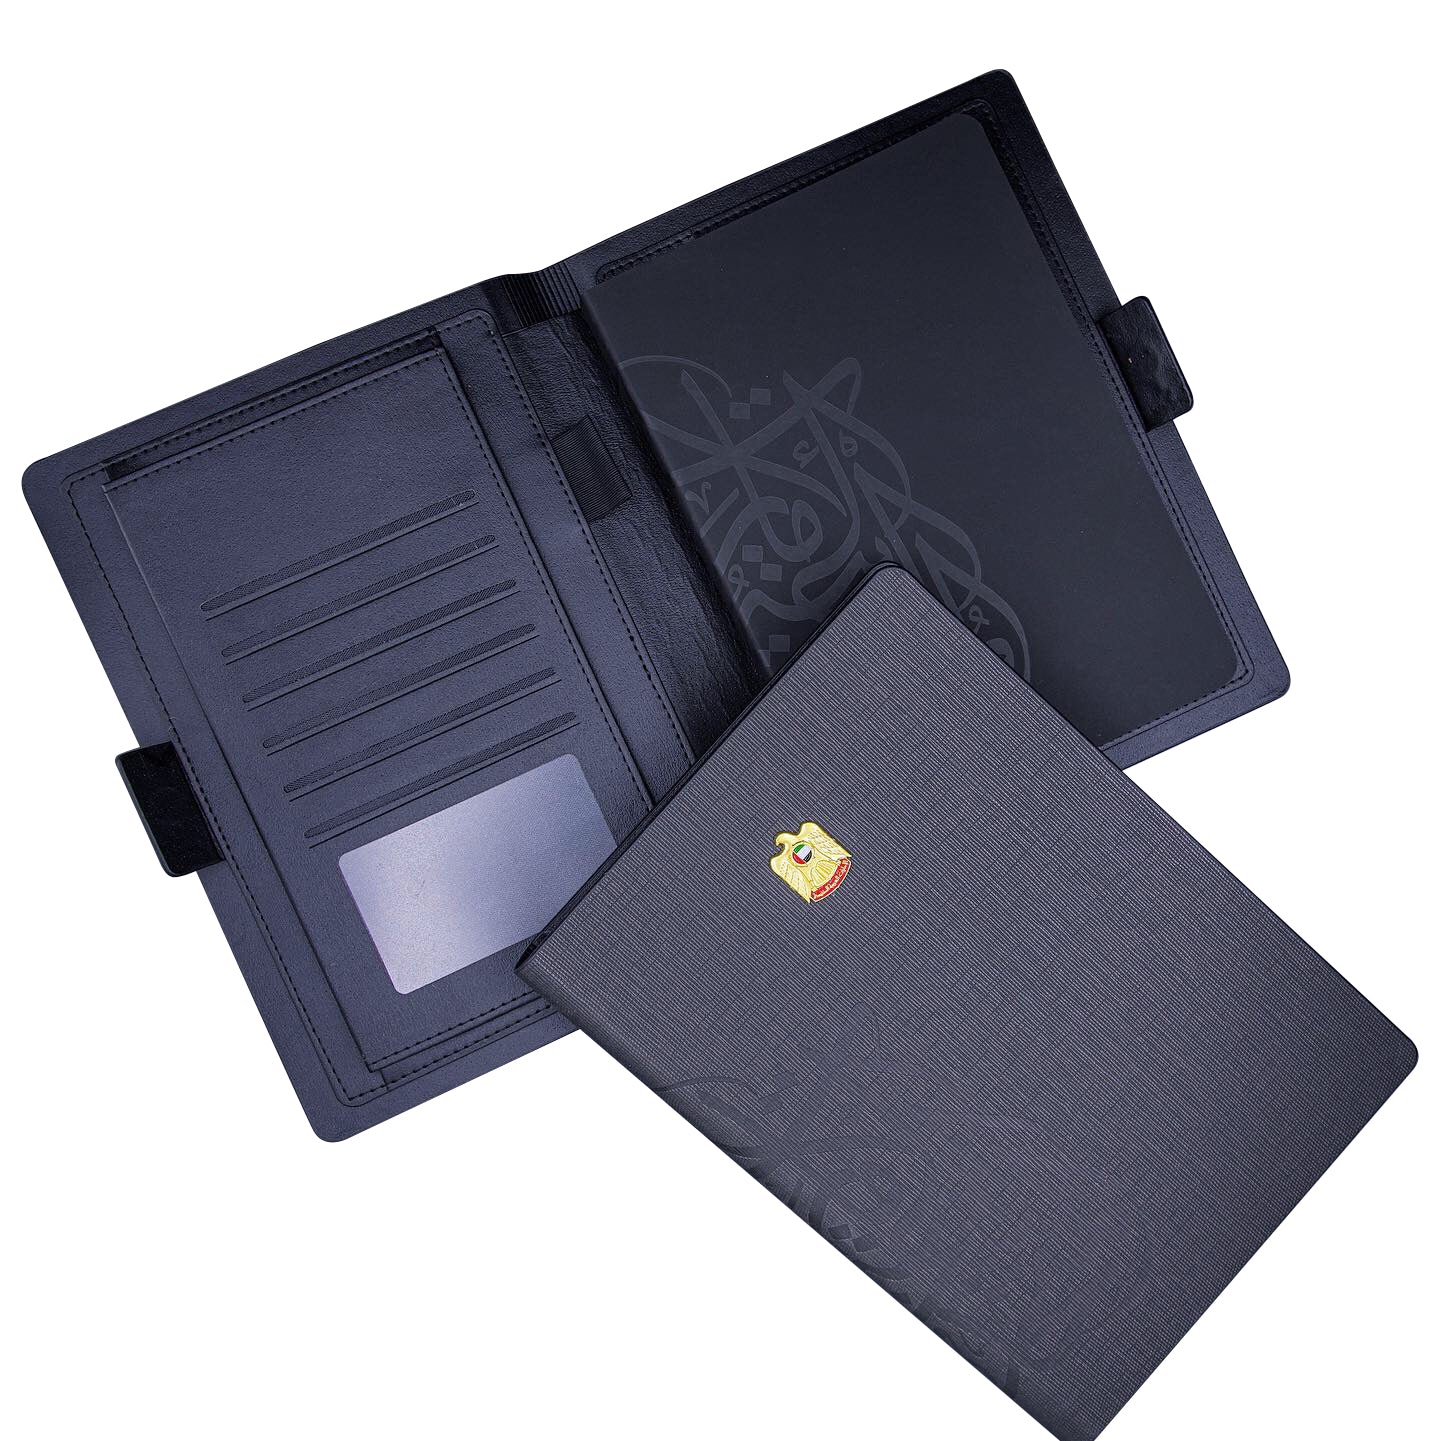 Rovatti UAE Notebook Black | gifts for her or him | gift ideas dubai